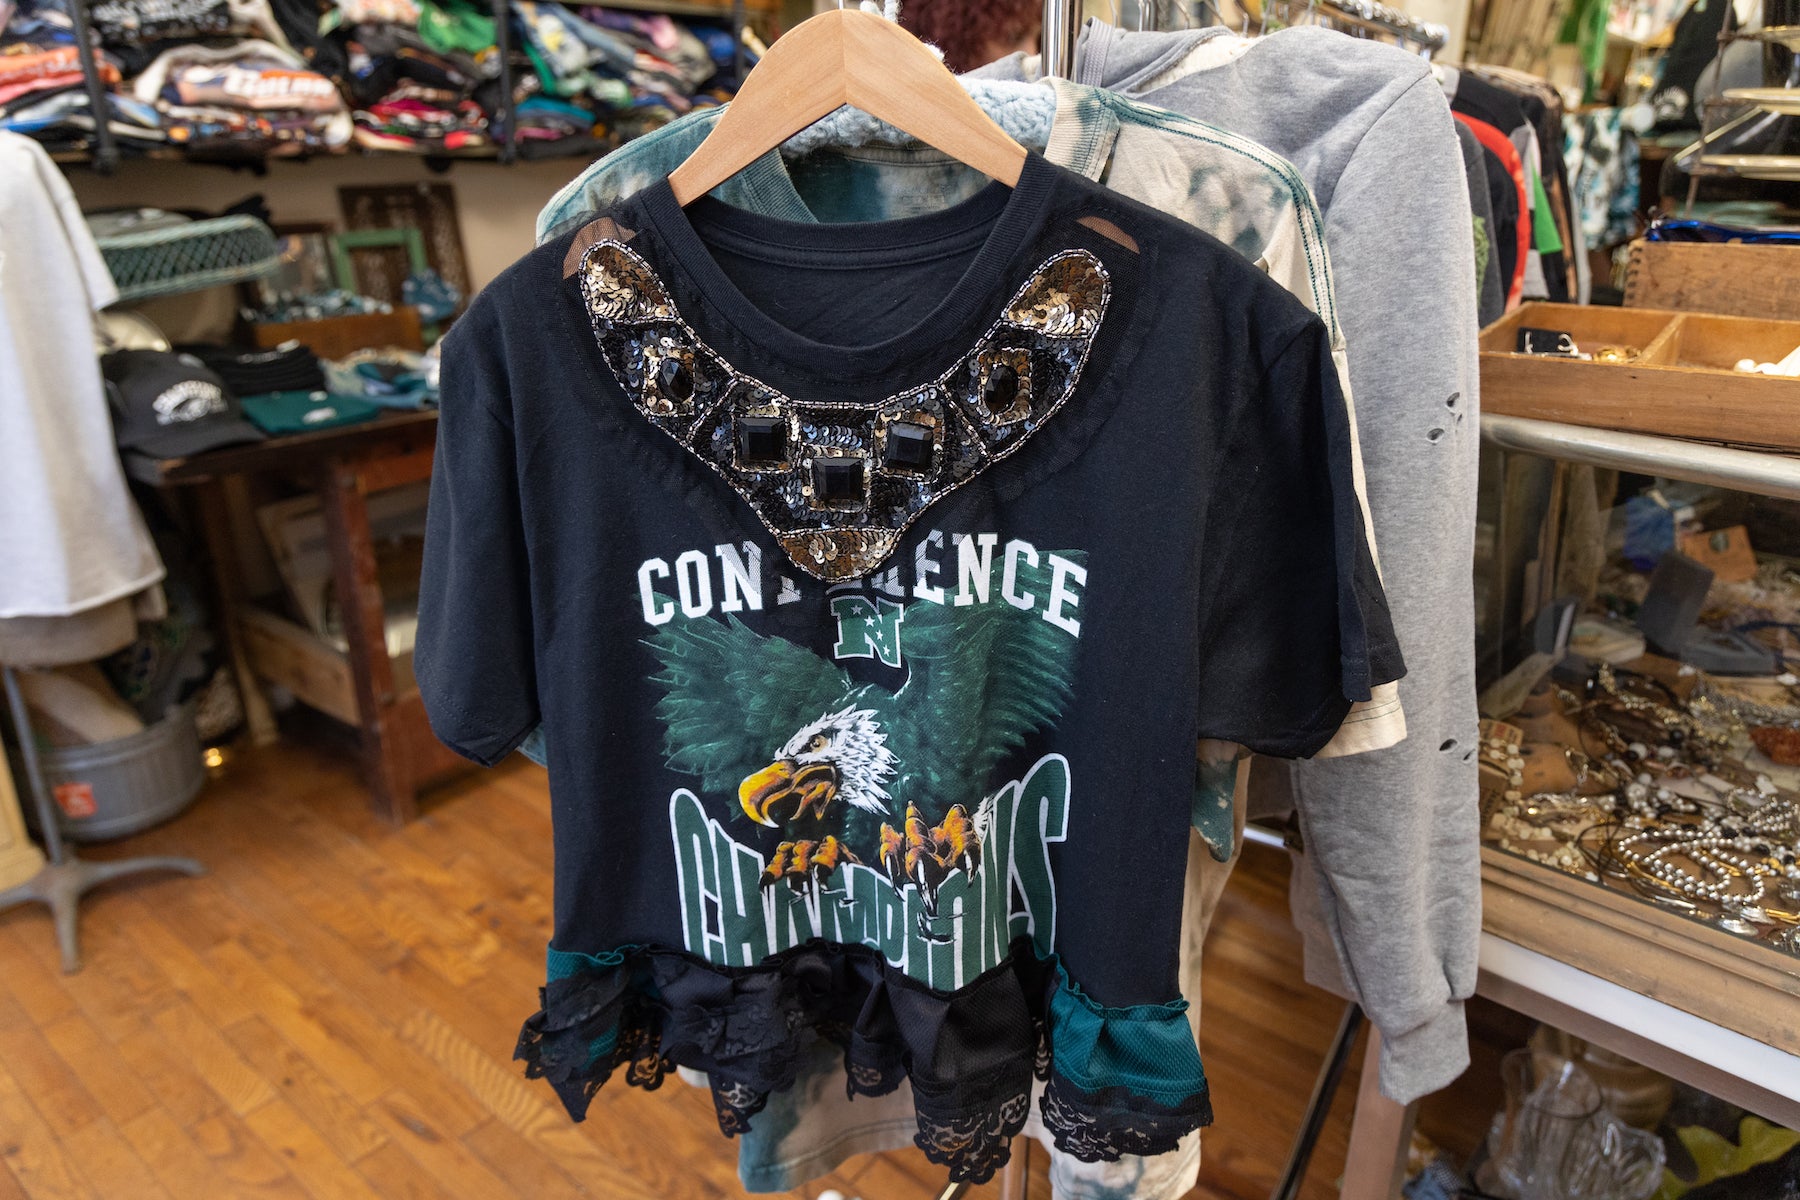 Best places in Philly to get Eagles Super Bowl jerseys, hoodies and other  merch